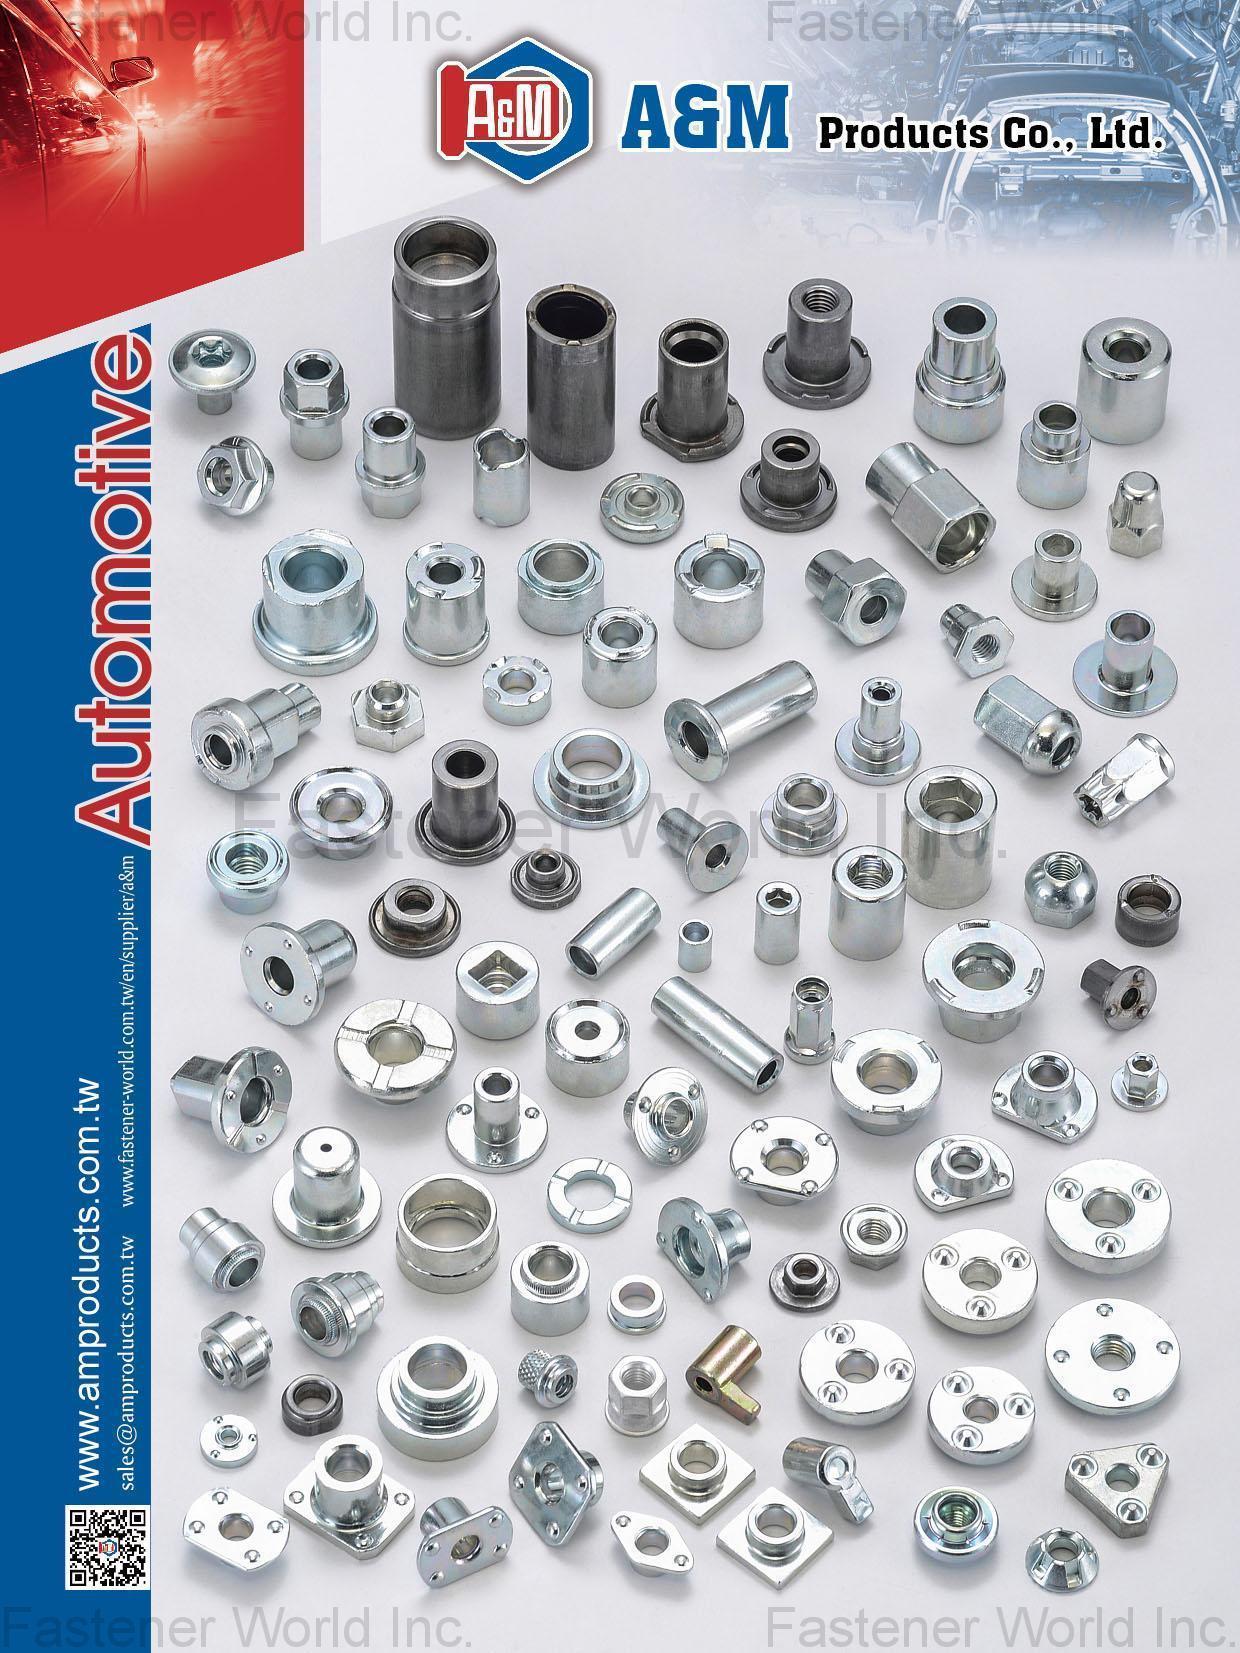 A & M PRODUCTS CO., LTD. , WELD NUTS,SPECIAL NUTS,NUT AND WASHER ASSEMBLY,SPECIAL SQUARE & HEX NUT,FLANGE NUTS,SPECIAL NUTS,NYLON FLANGE NUTS,PREVAILING TORQUE NUTS,WELD NUTS,BUSHING AND SPACER,SPECIAL NUTS,SPECIAL FLANGE NUTS , Automotive Parts